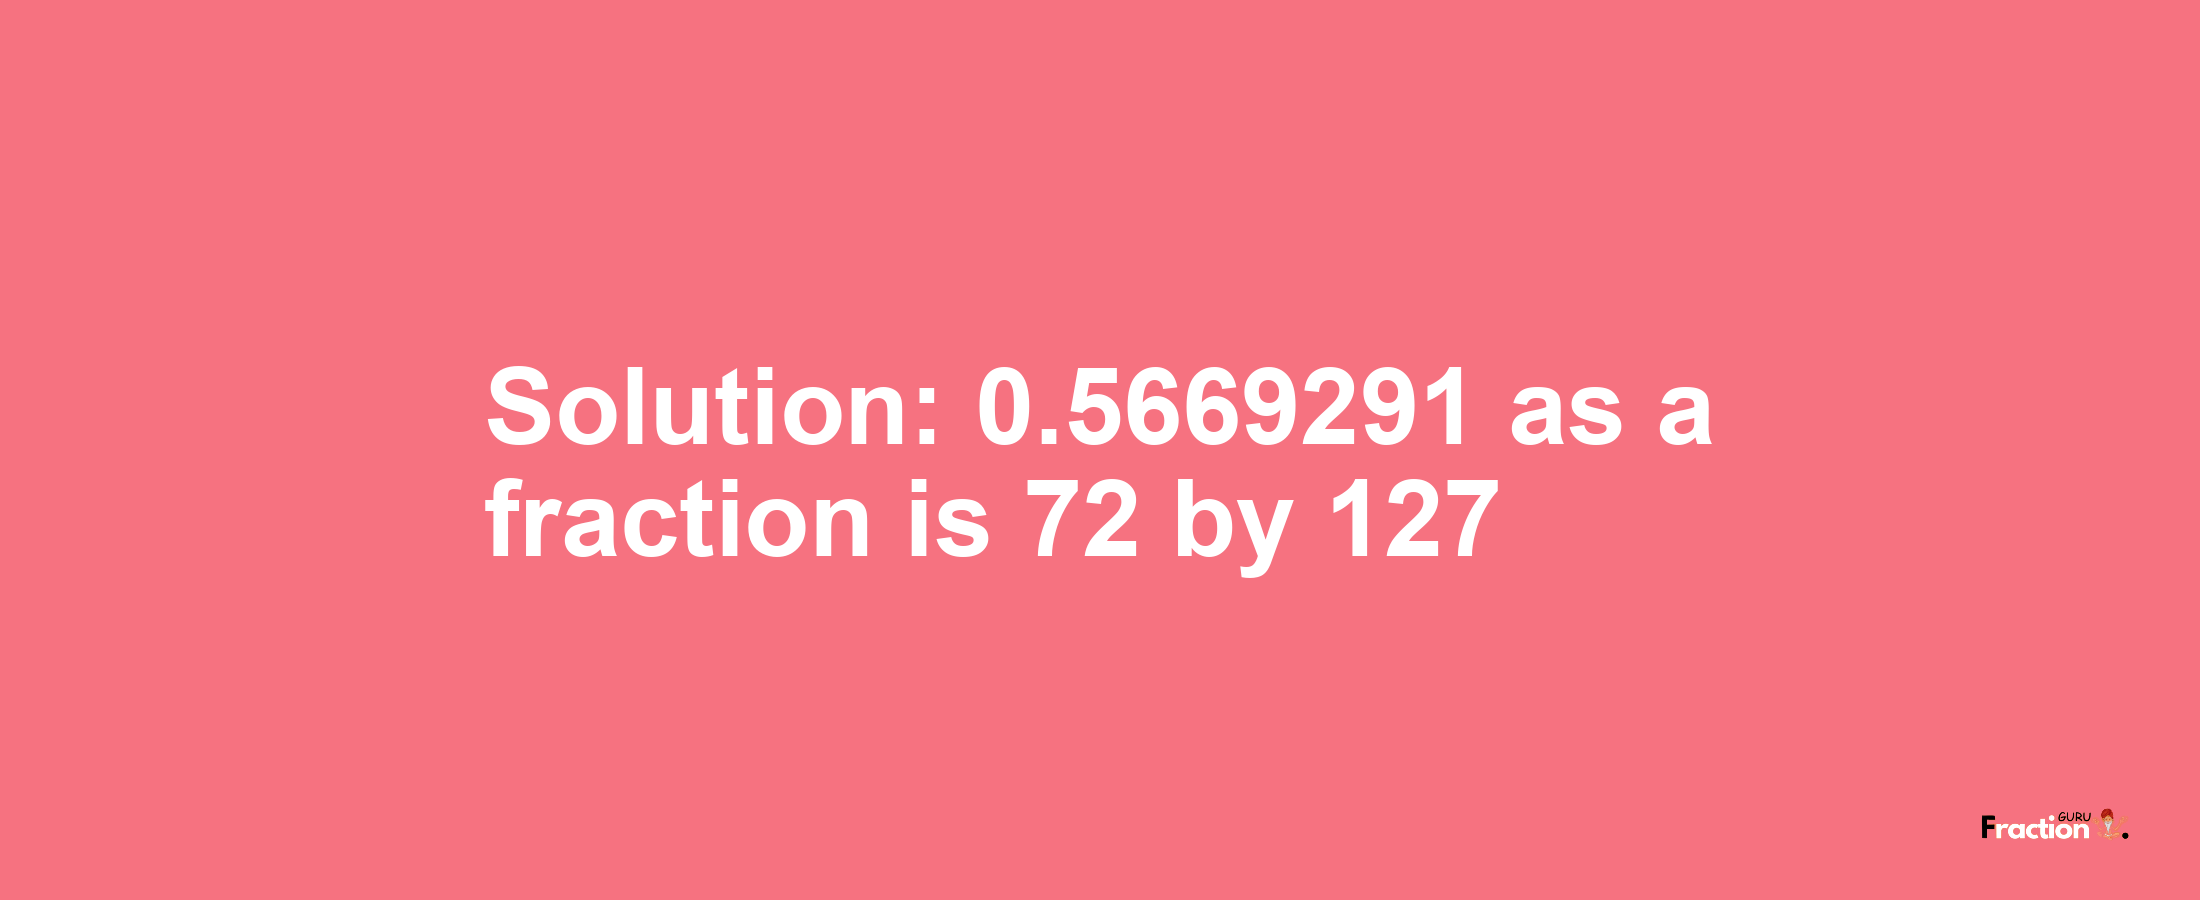 Solution:0.5669291 as a fraction is 72/127